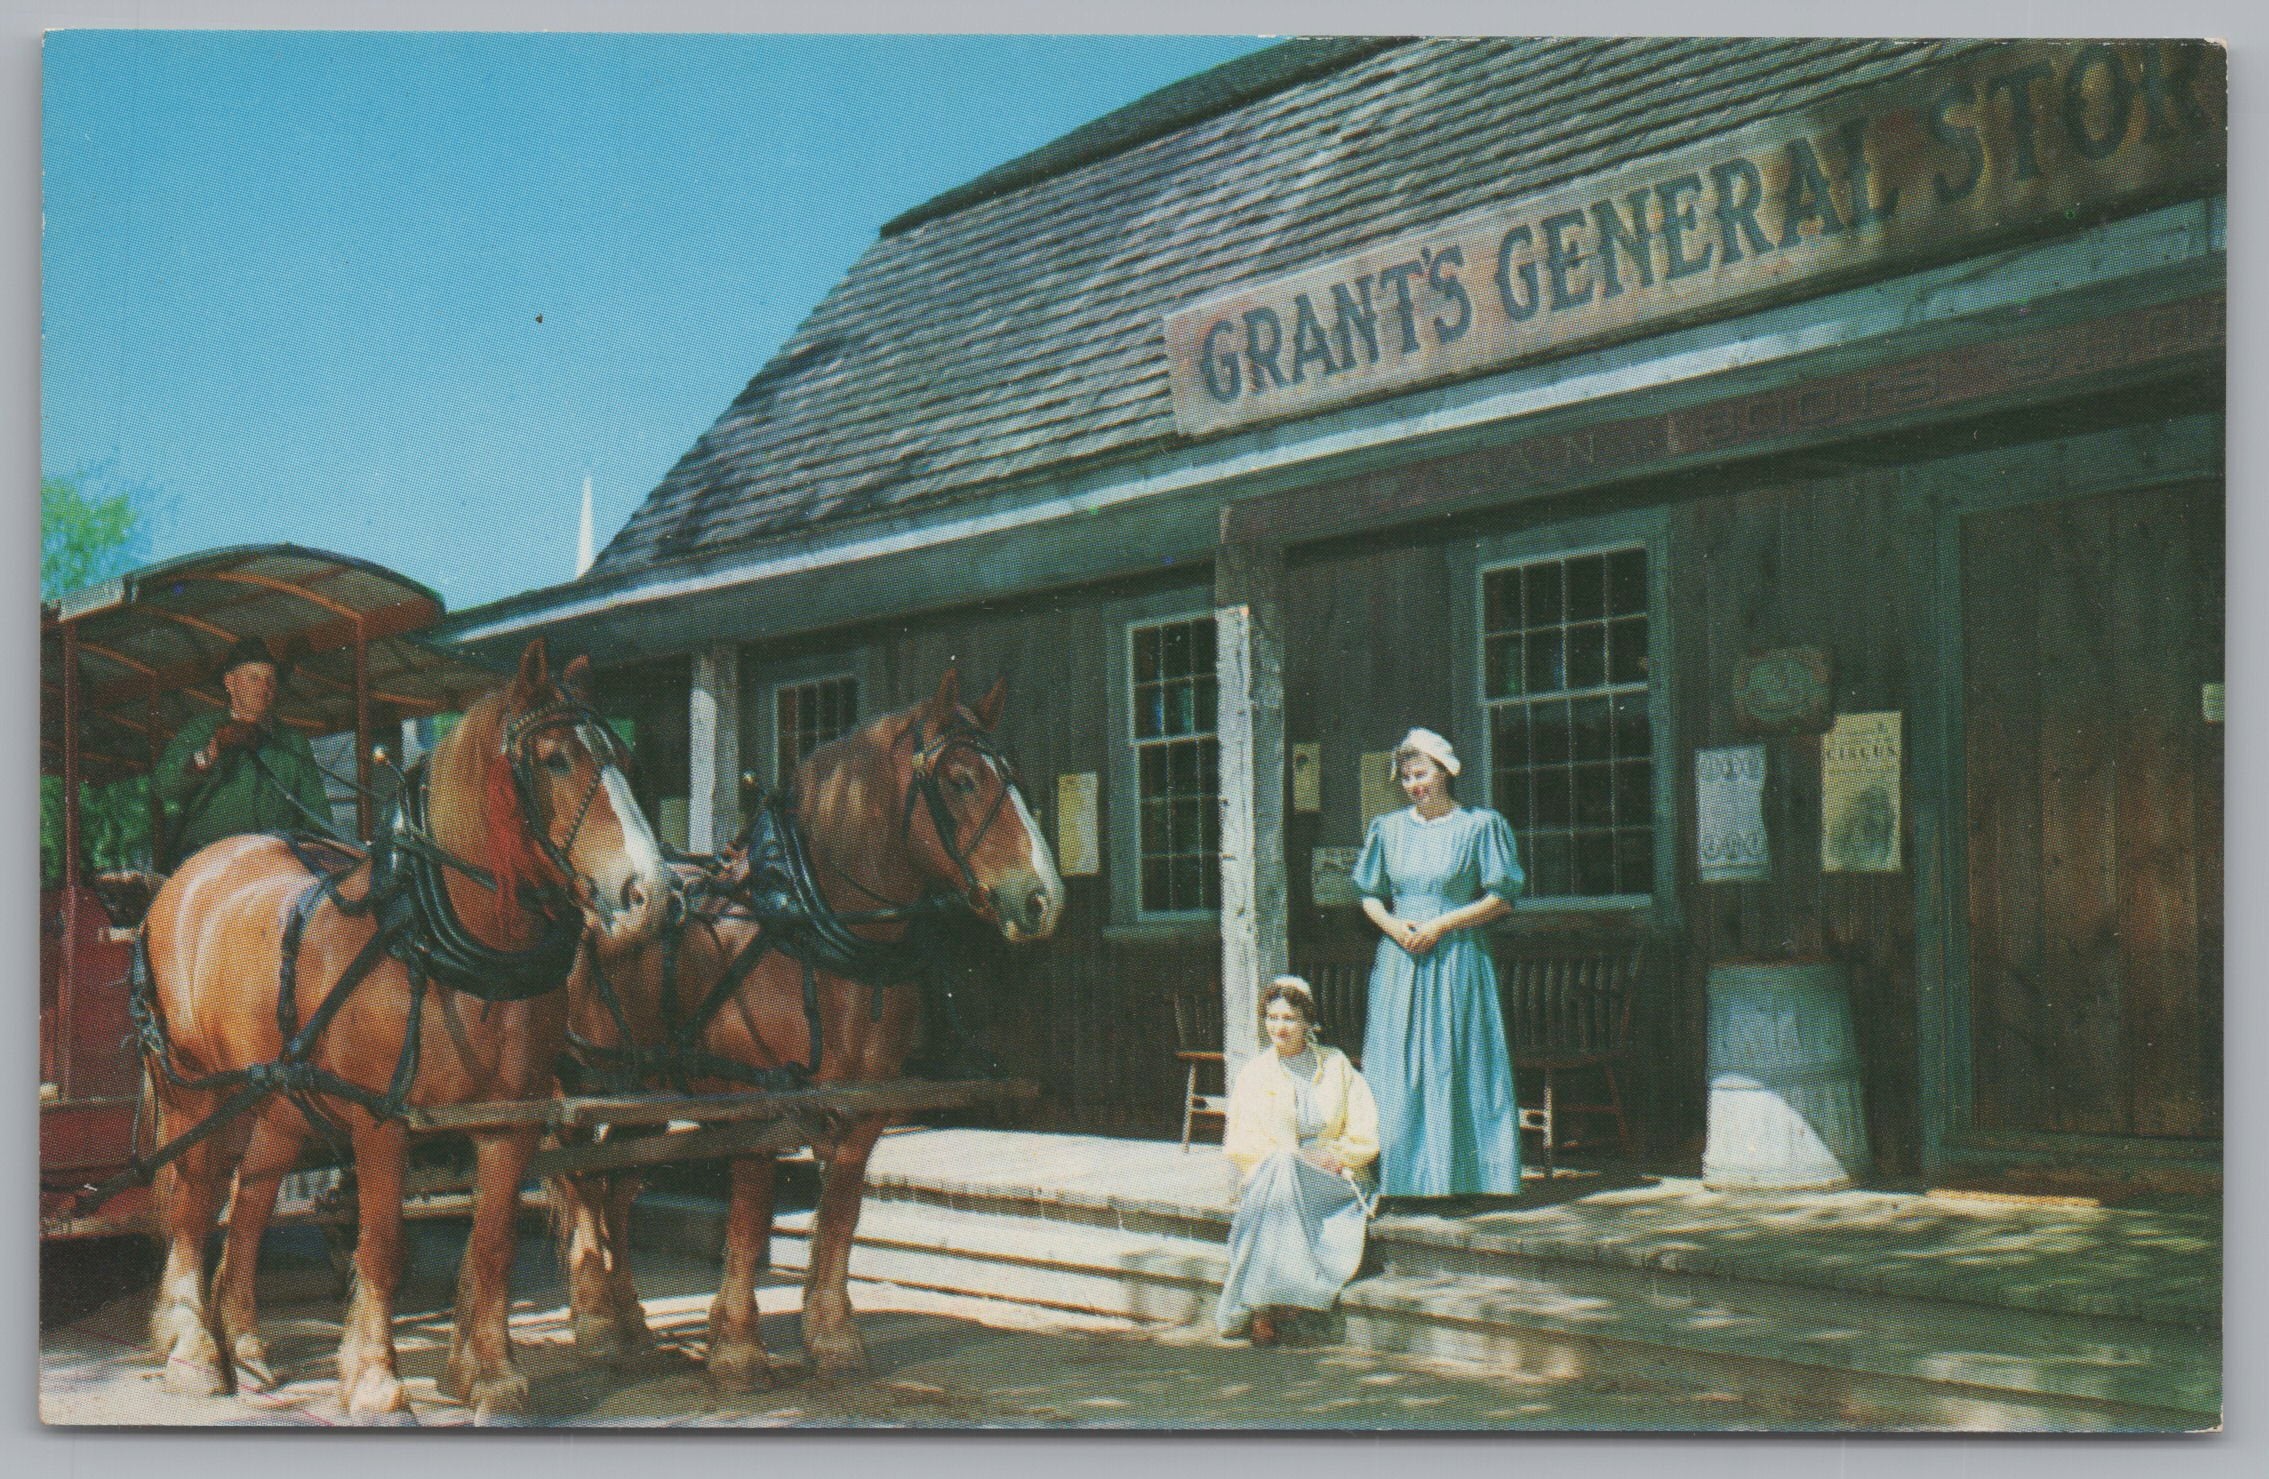 Miner Grants General Store, Horse and Carriage, Vintage Post Card.